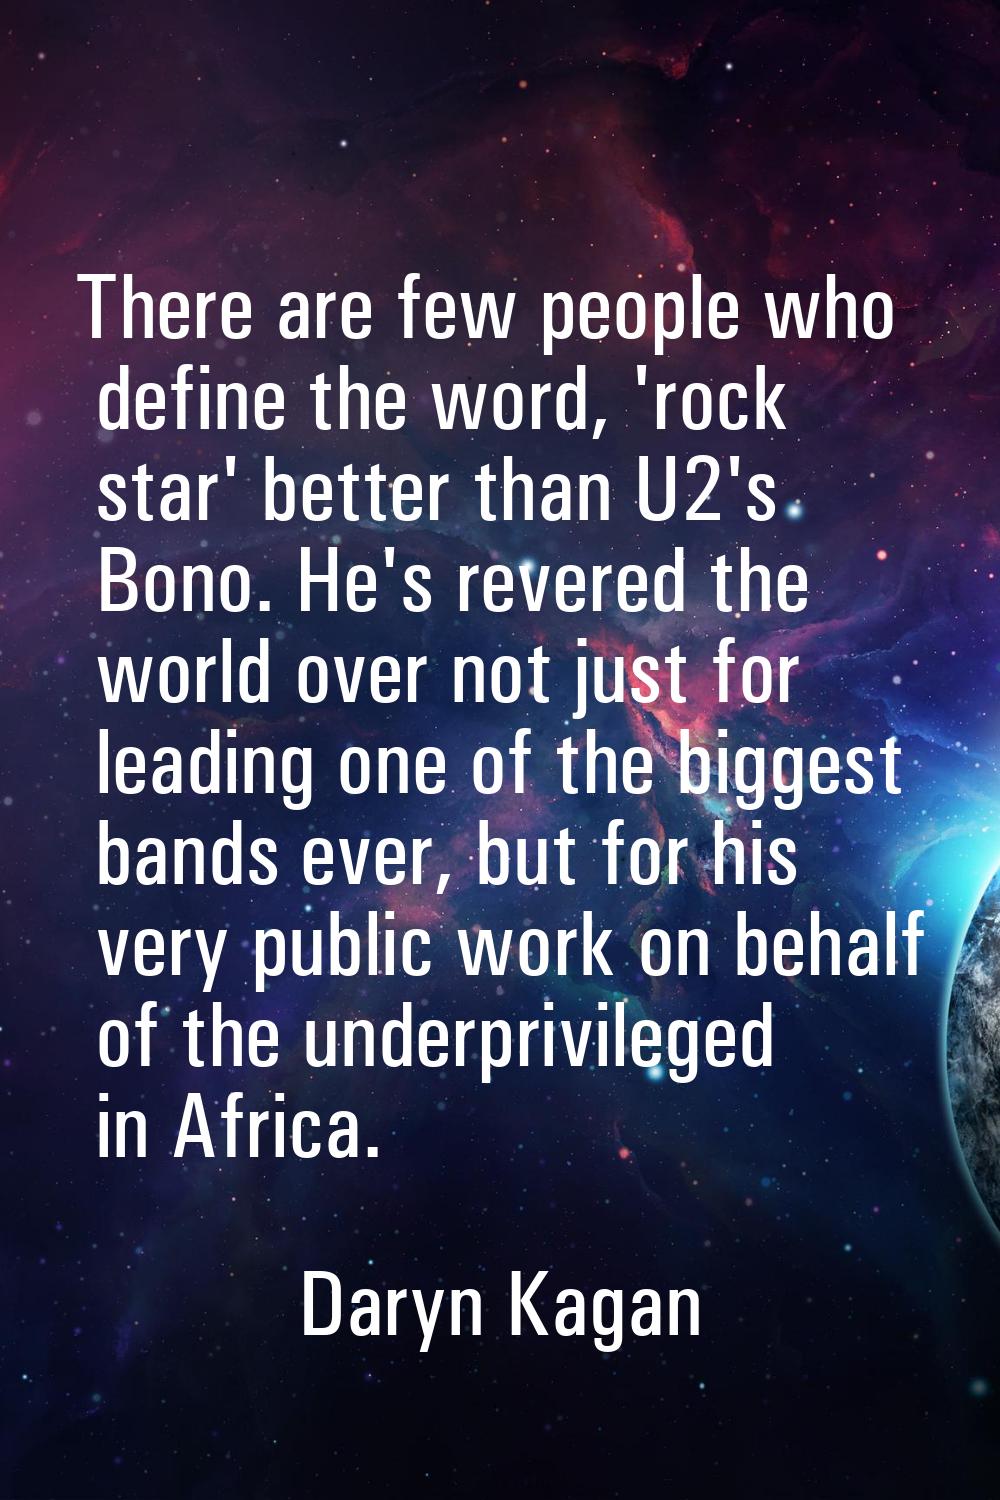 There are few people who define the word, 'rock star' better than U2's Bono. He's revered the world